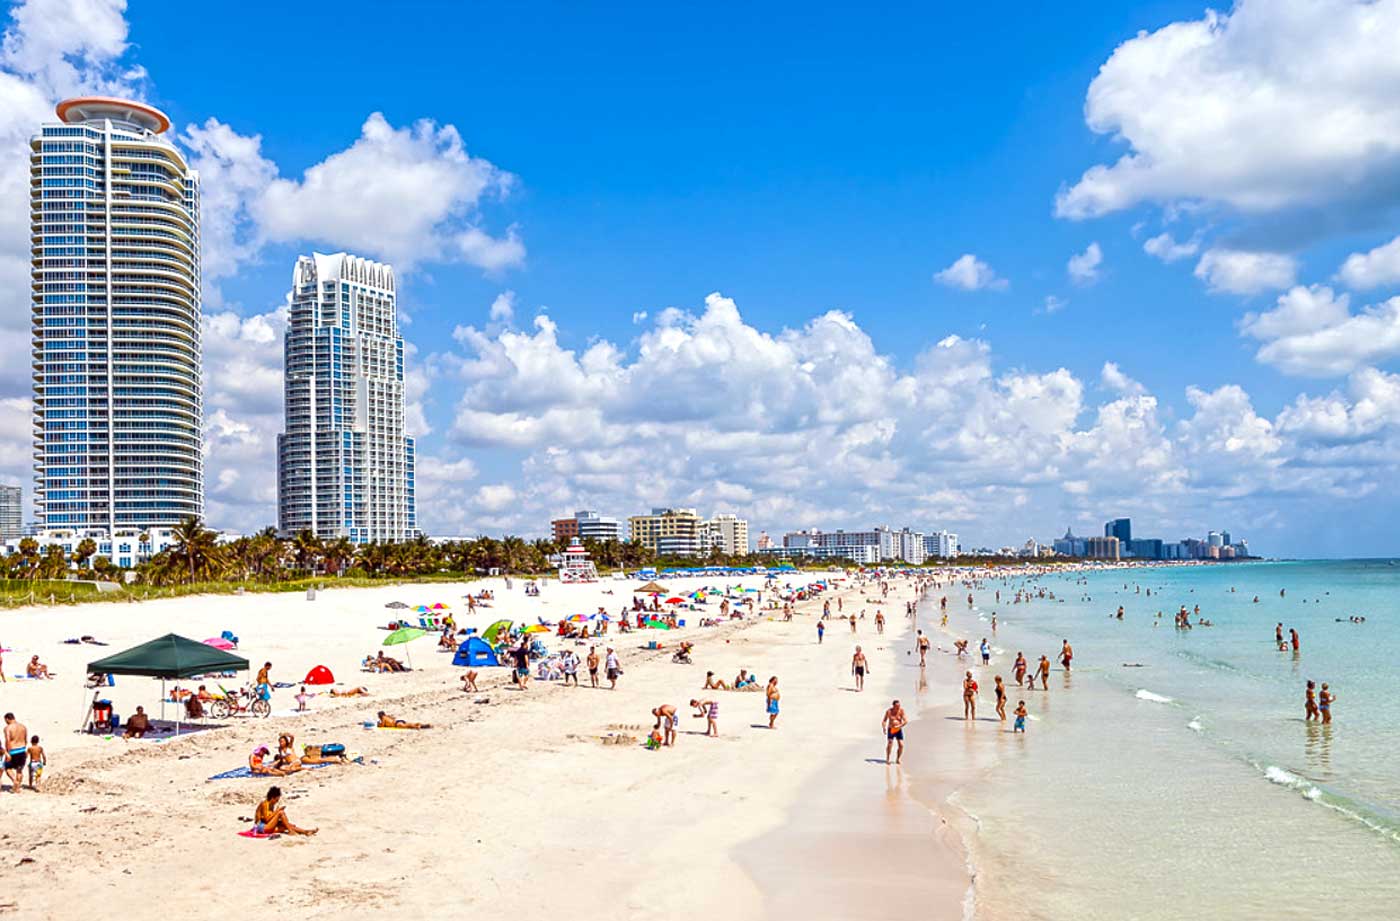 Tourism in Florida: The Sunshine State's Shimmering Attraction